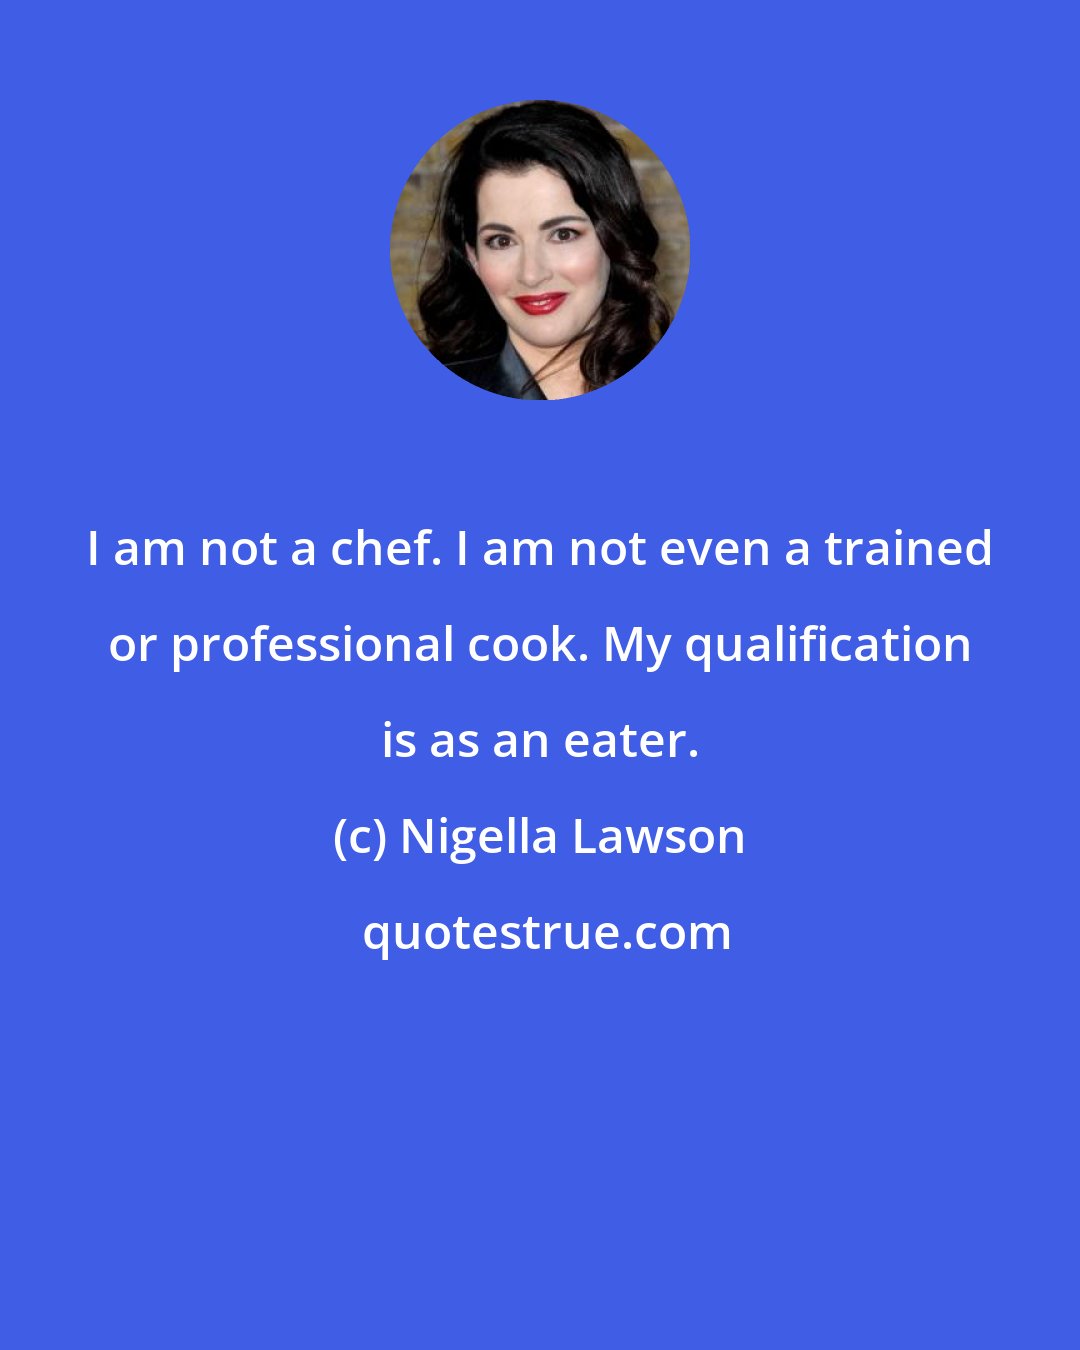 Nigella Lawson: I am not a chef. I am not even a trained or professional cook. My qualification is as an eater.